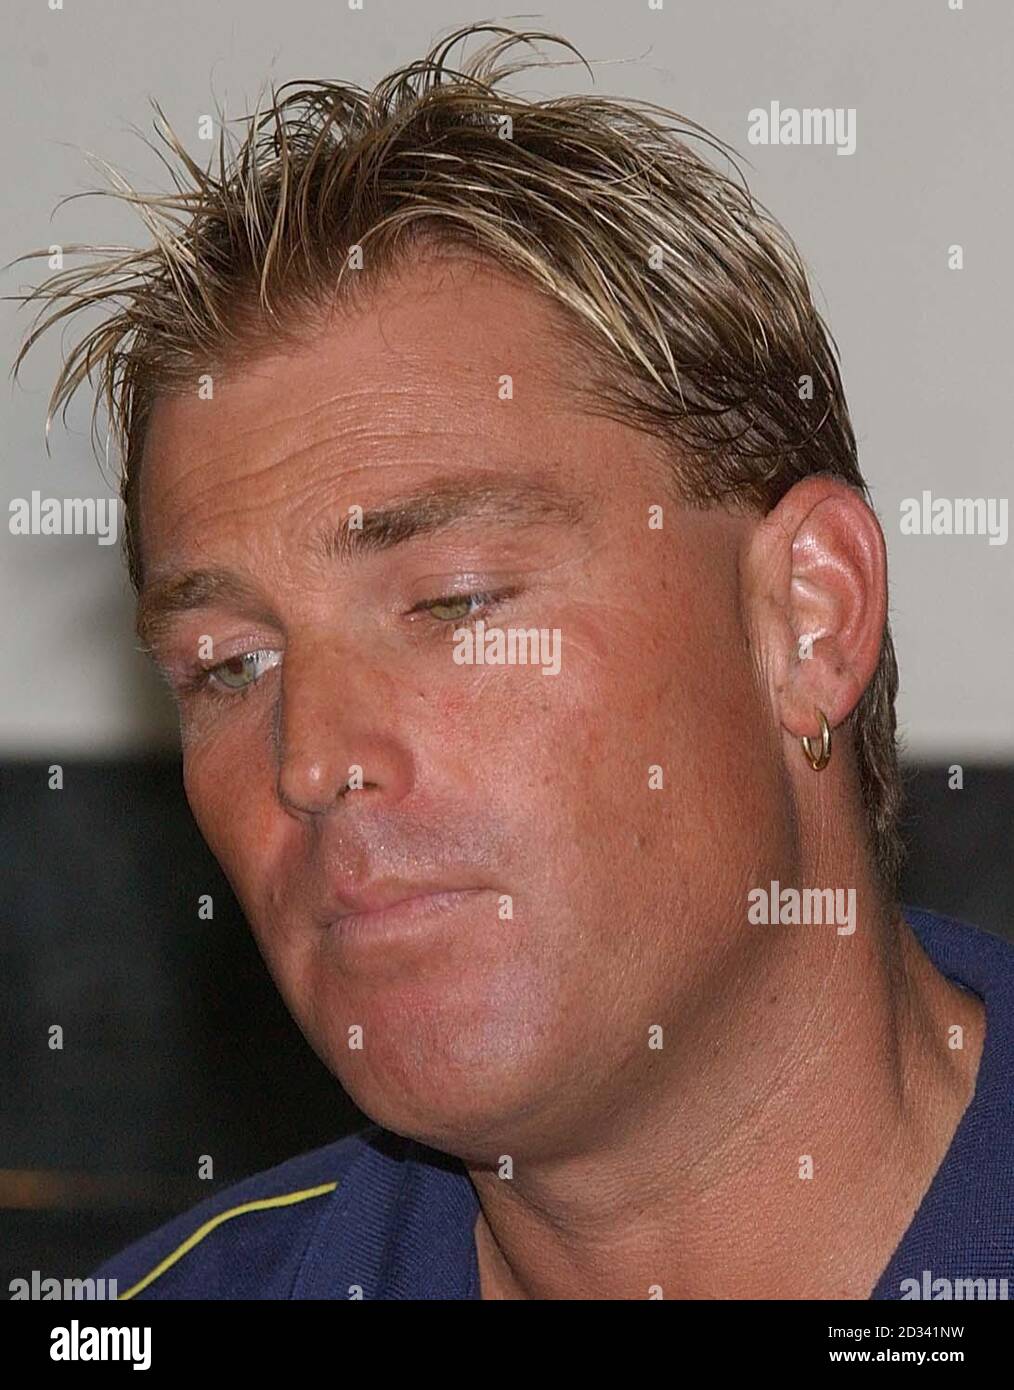 FOR EDITORIAL USE ONLY. NO COMMERCIAL USE : Australian spin bowler Shane Warne announces his retirement from One Day International Cricket after the World Cup, at a press conference the team